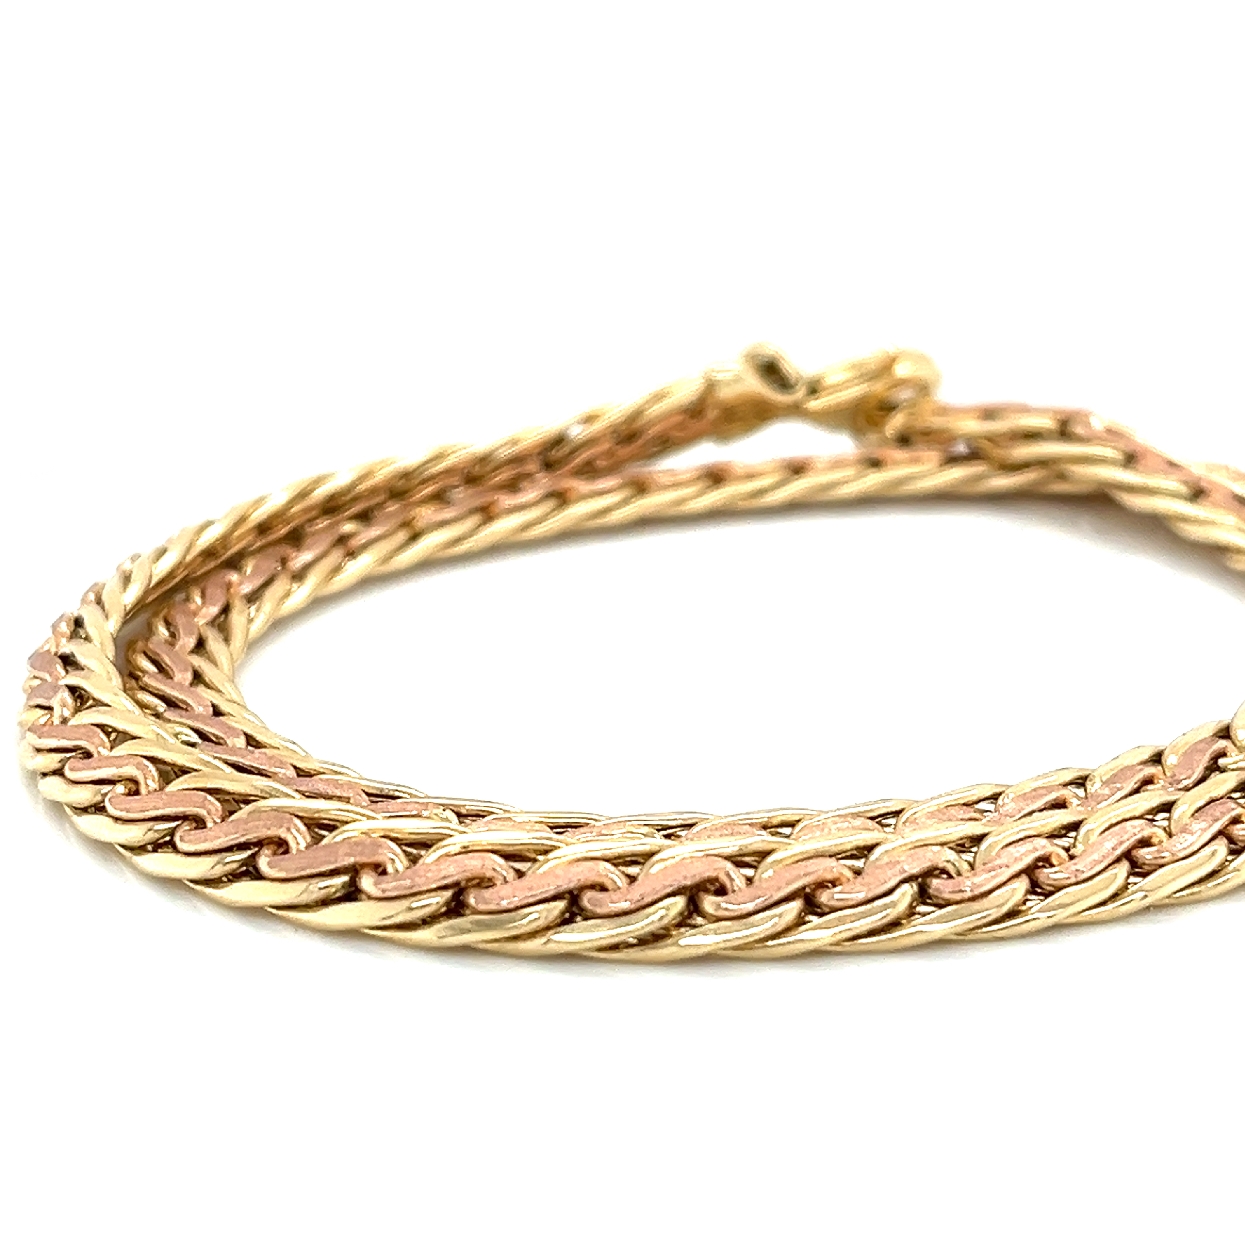 14kt yellow gold Turkish weave necklace 16.5 inches